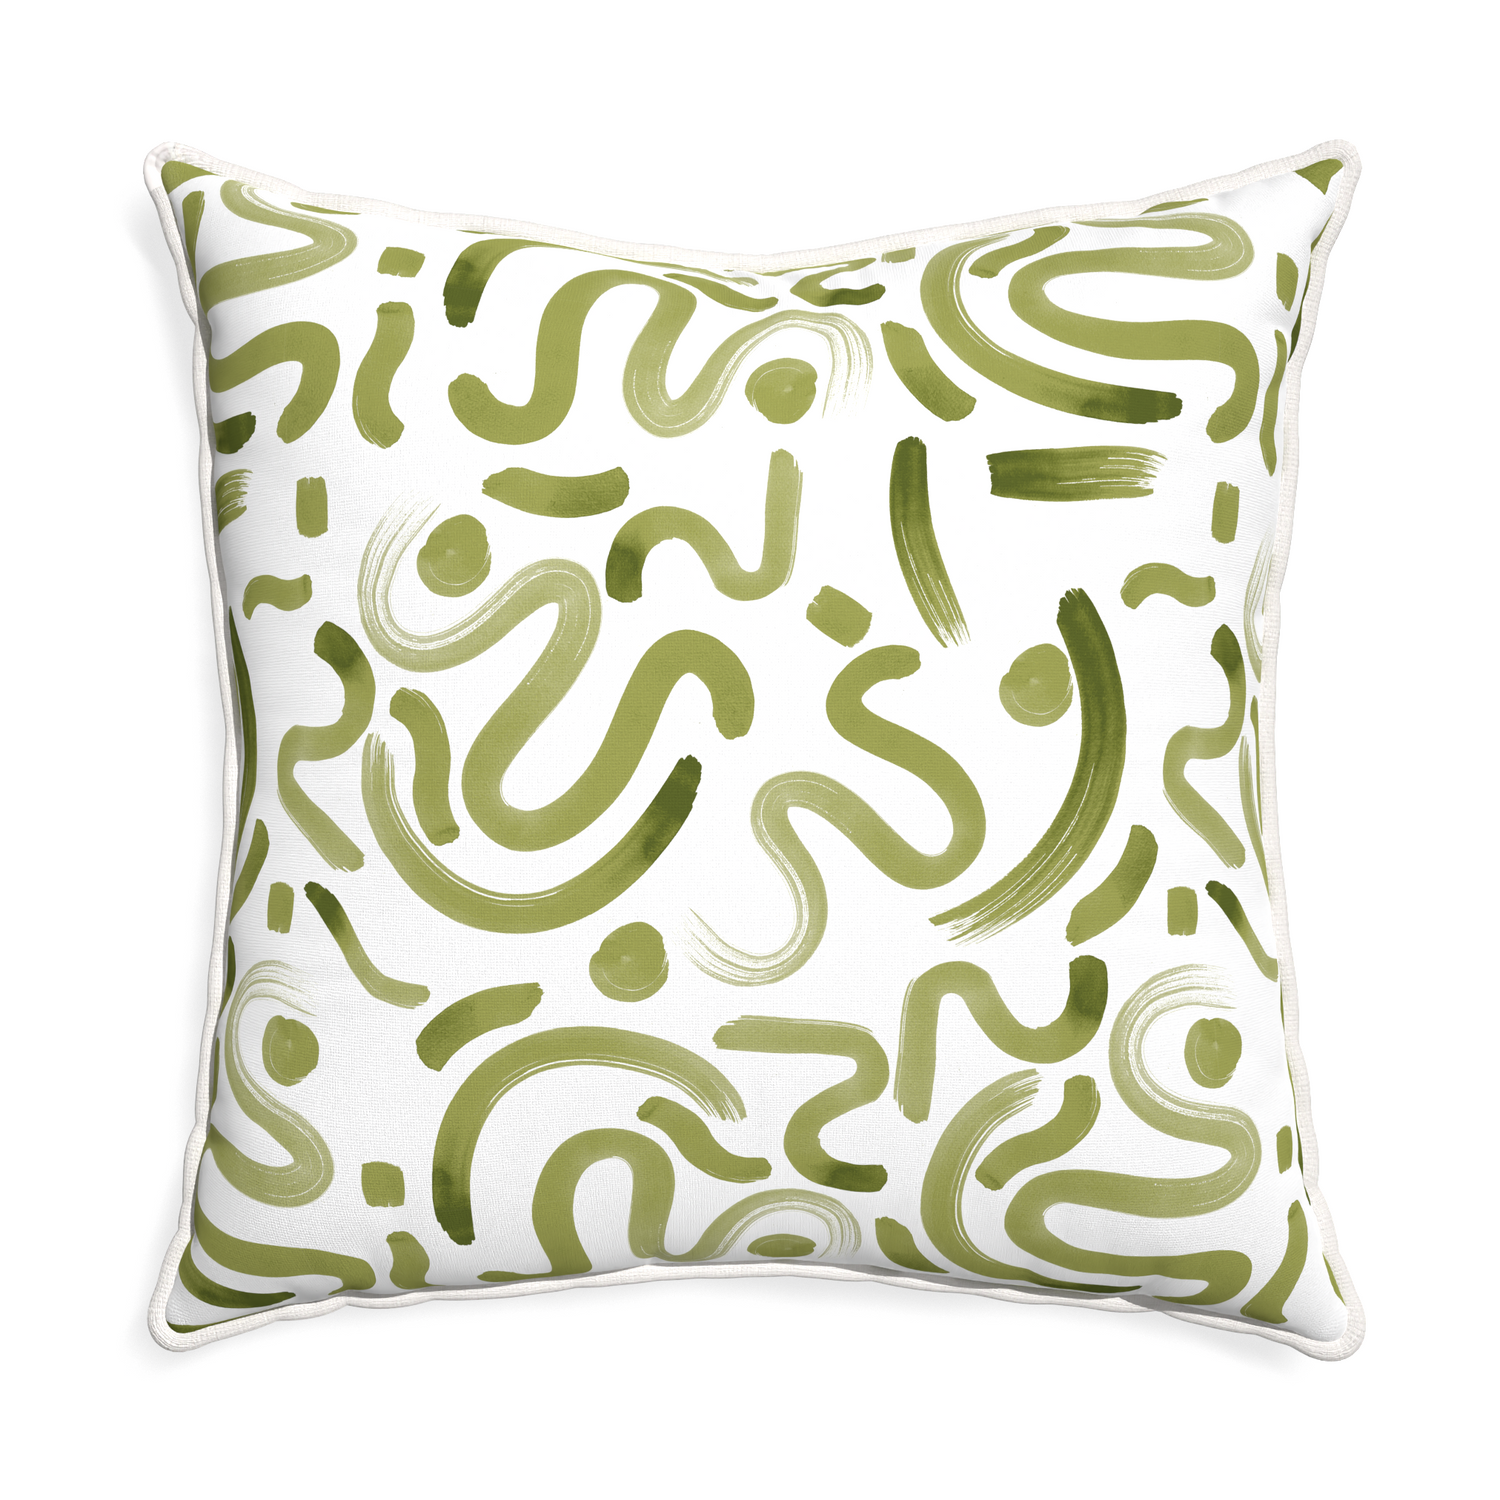 Euro-sham hockney moss custom moss greenpillow with snow piping on white background